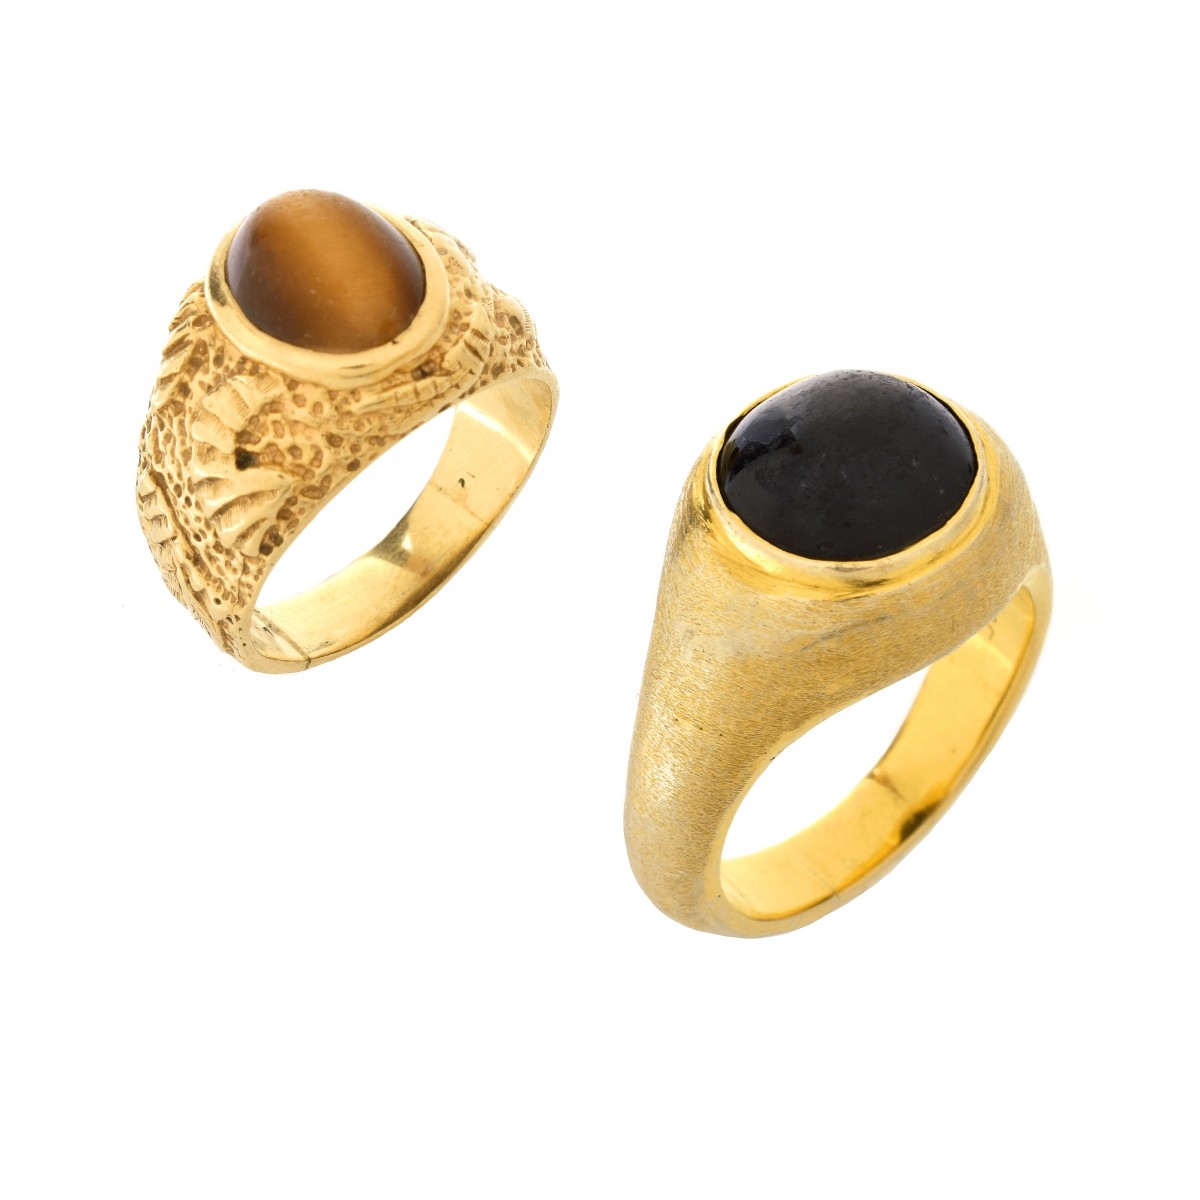 Two Men's 14K and Gemstone Rings